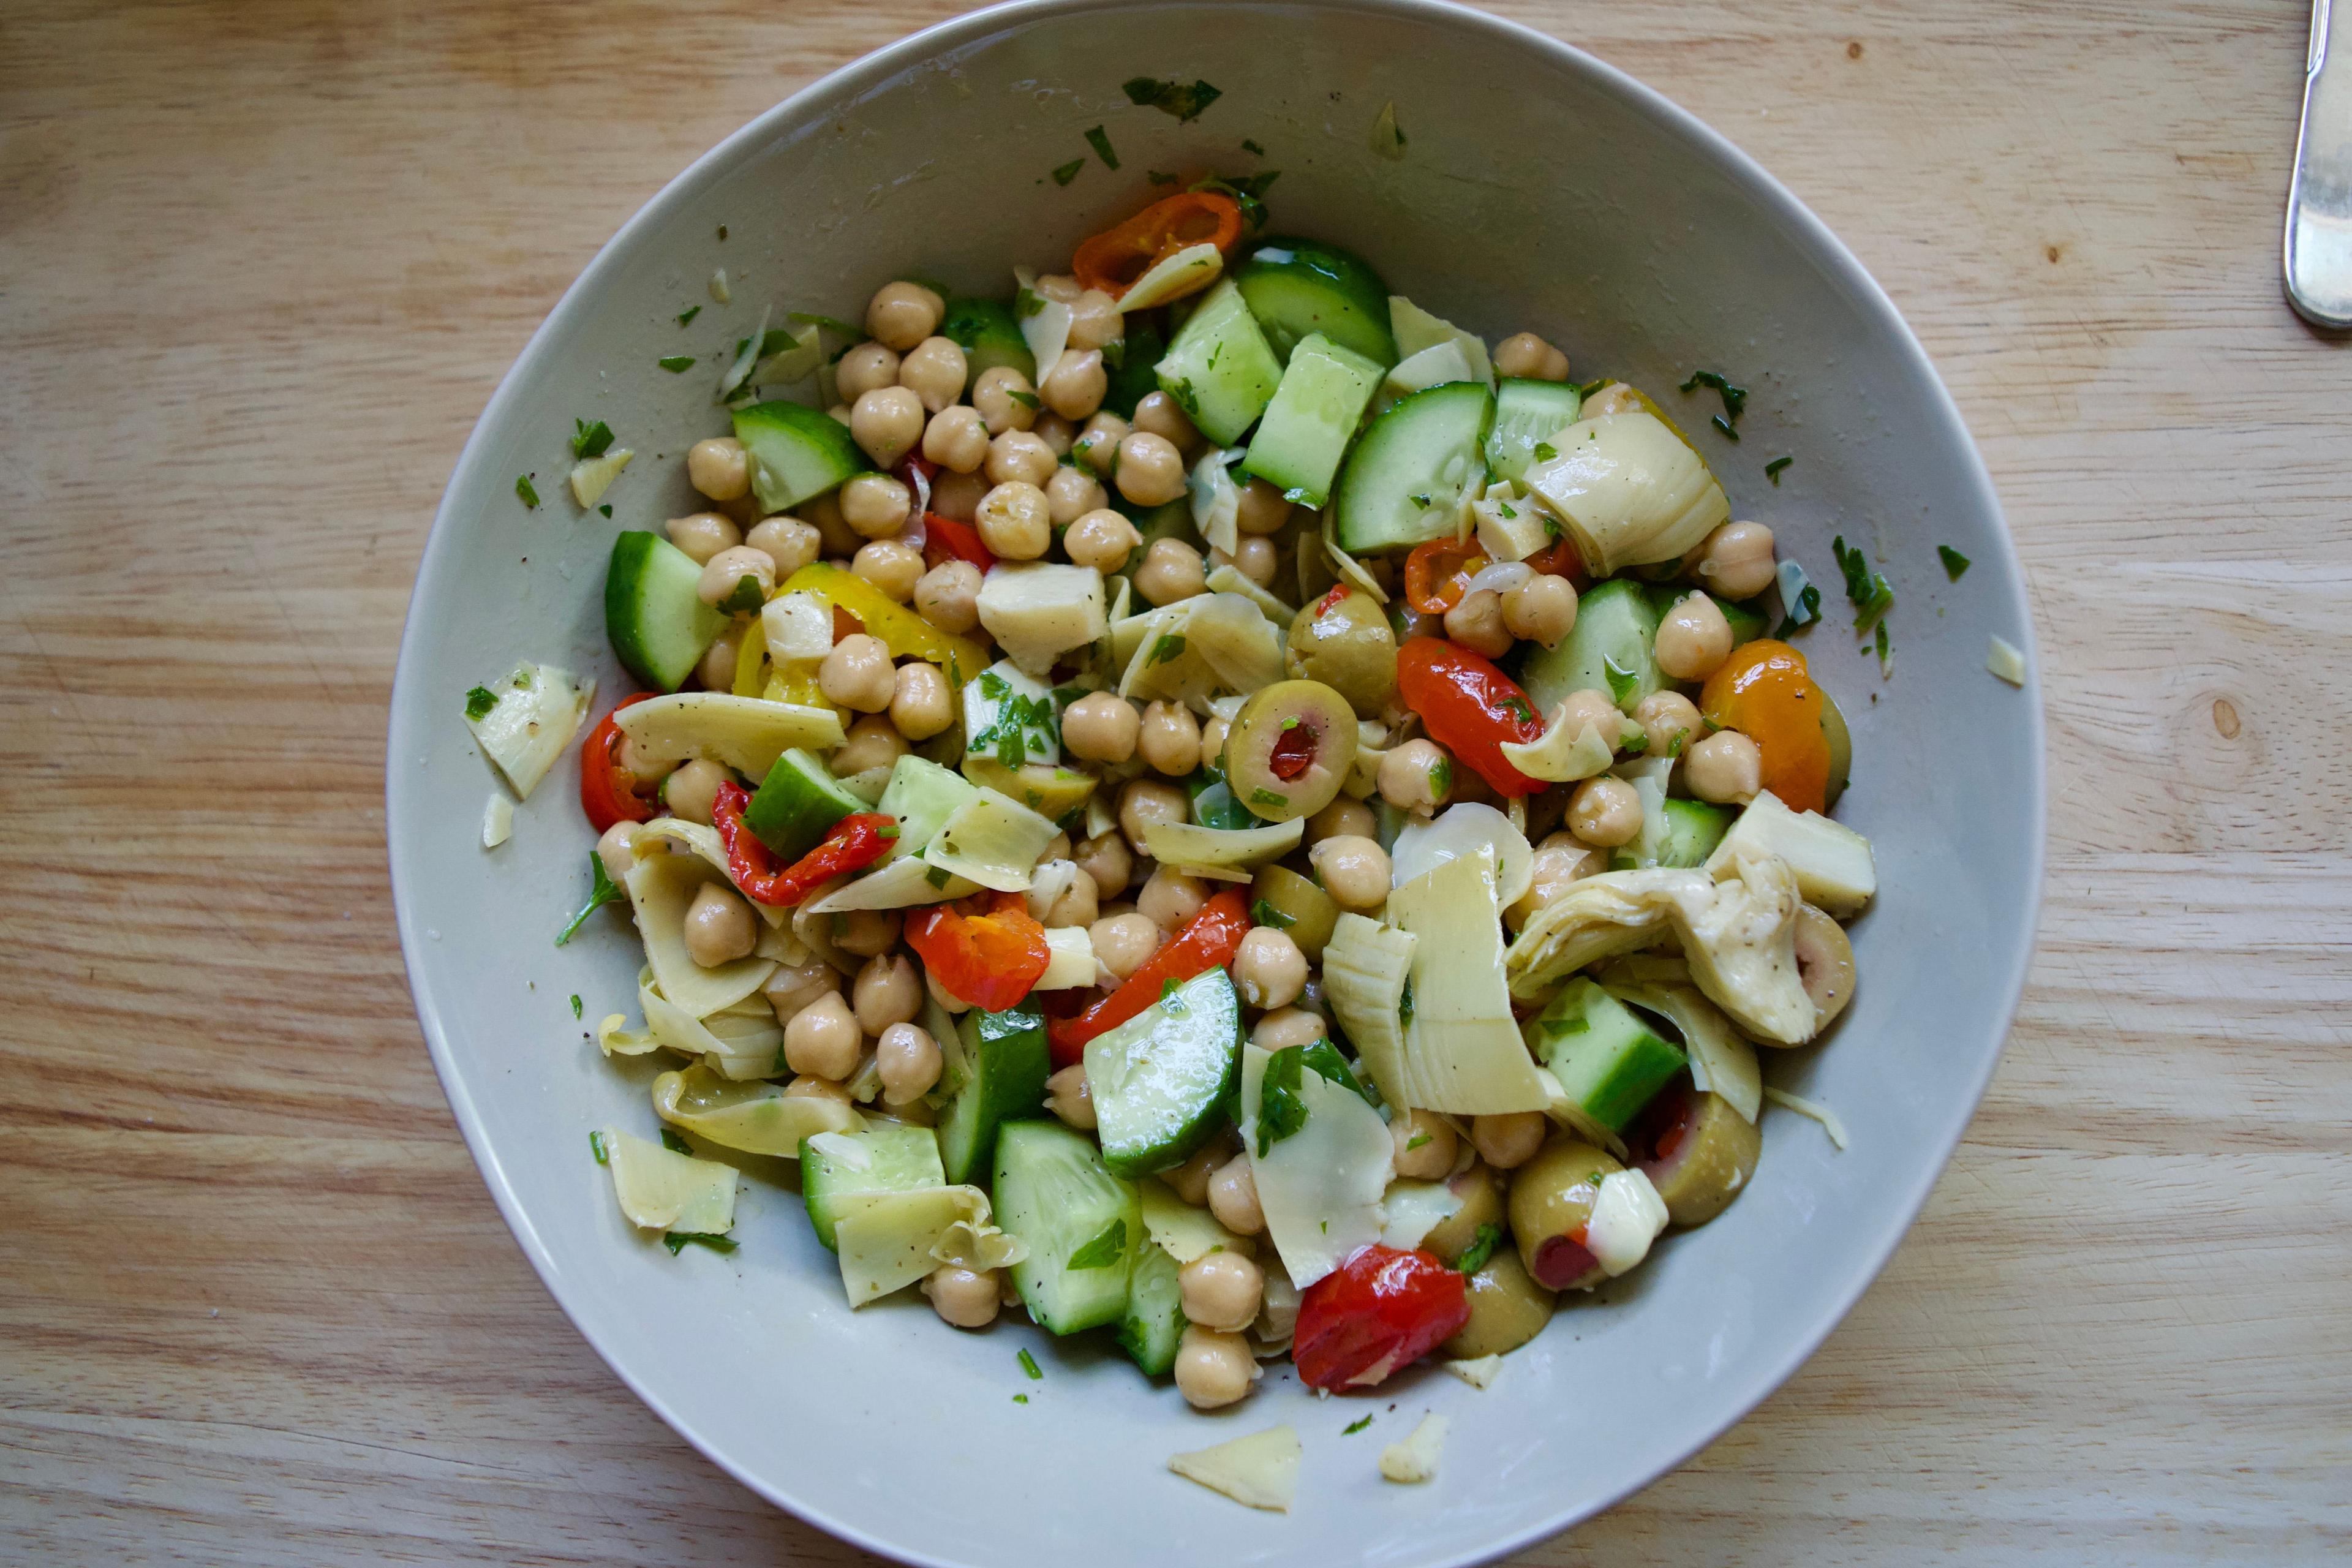 Bowl of chickpea salad with cucumbers and olives